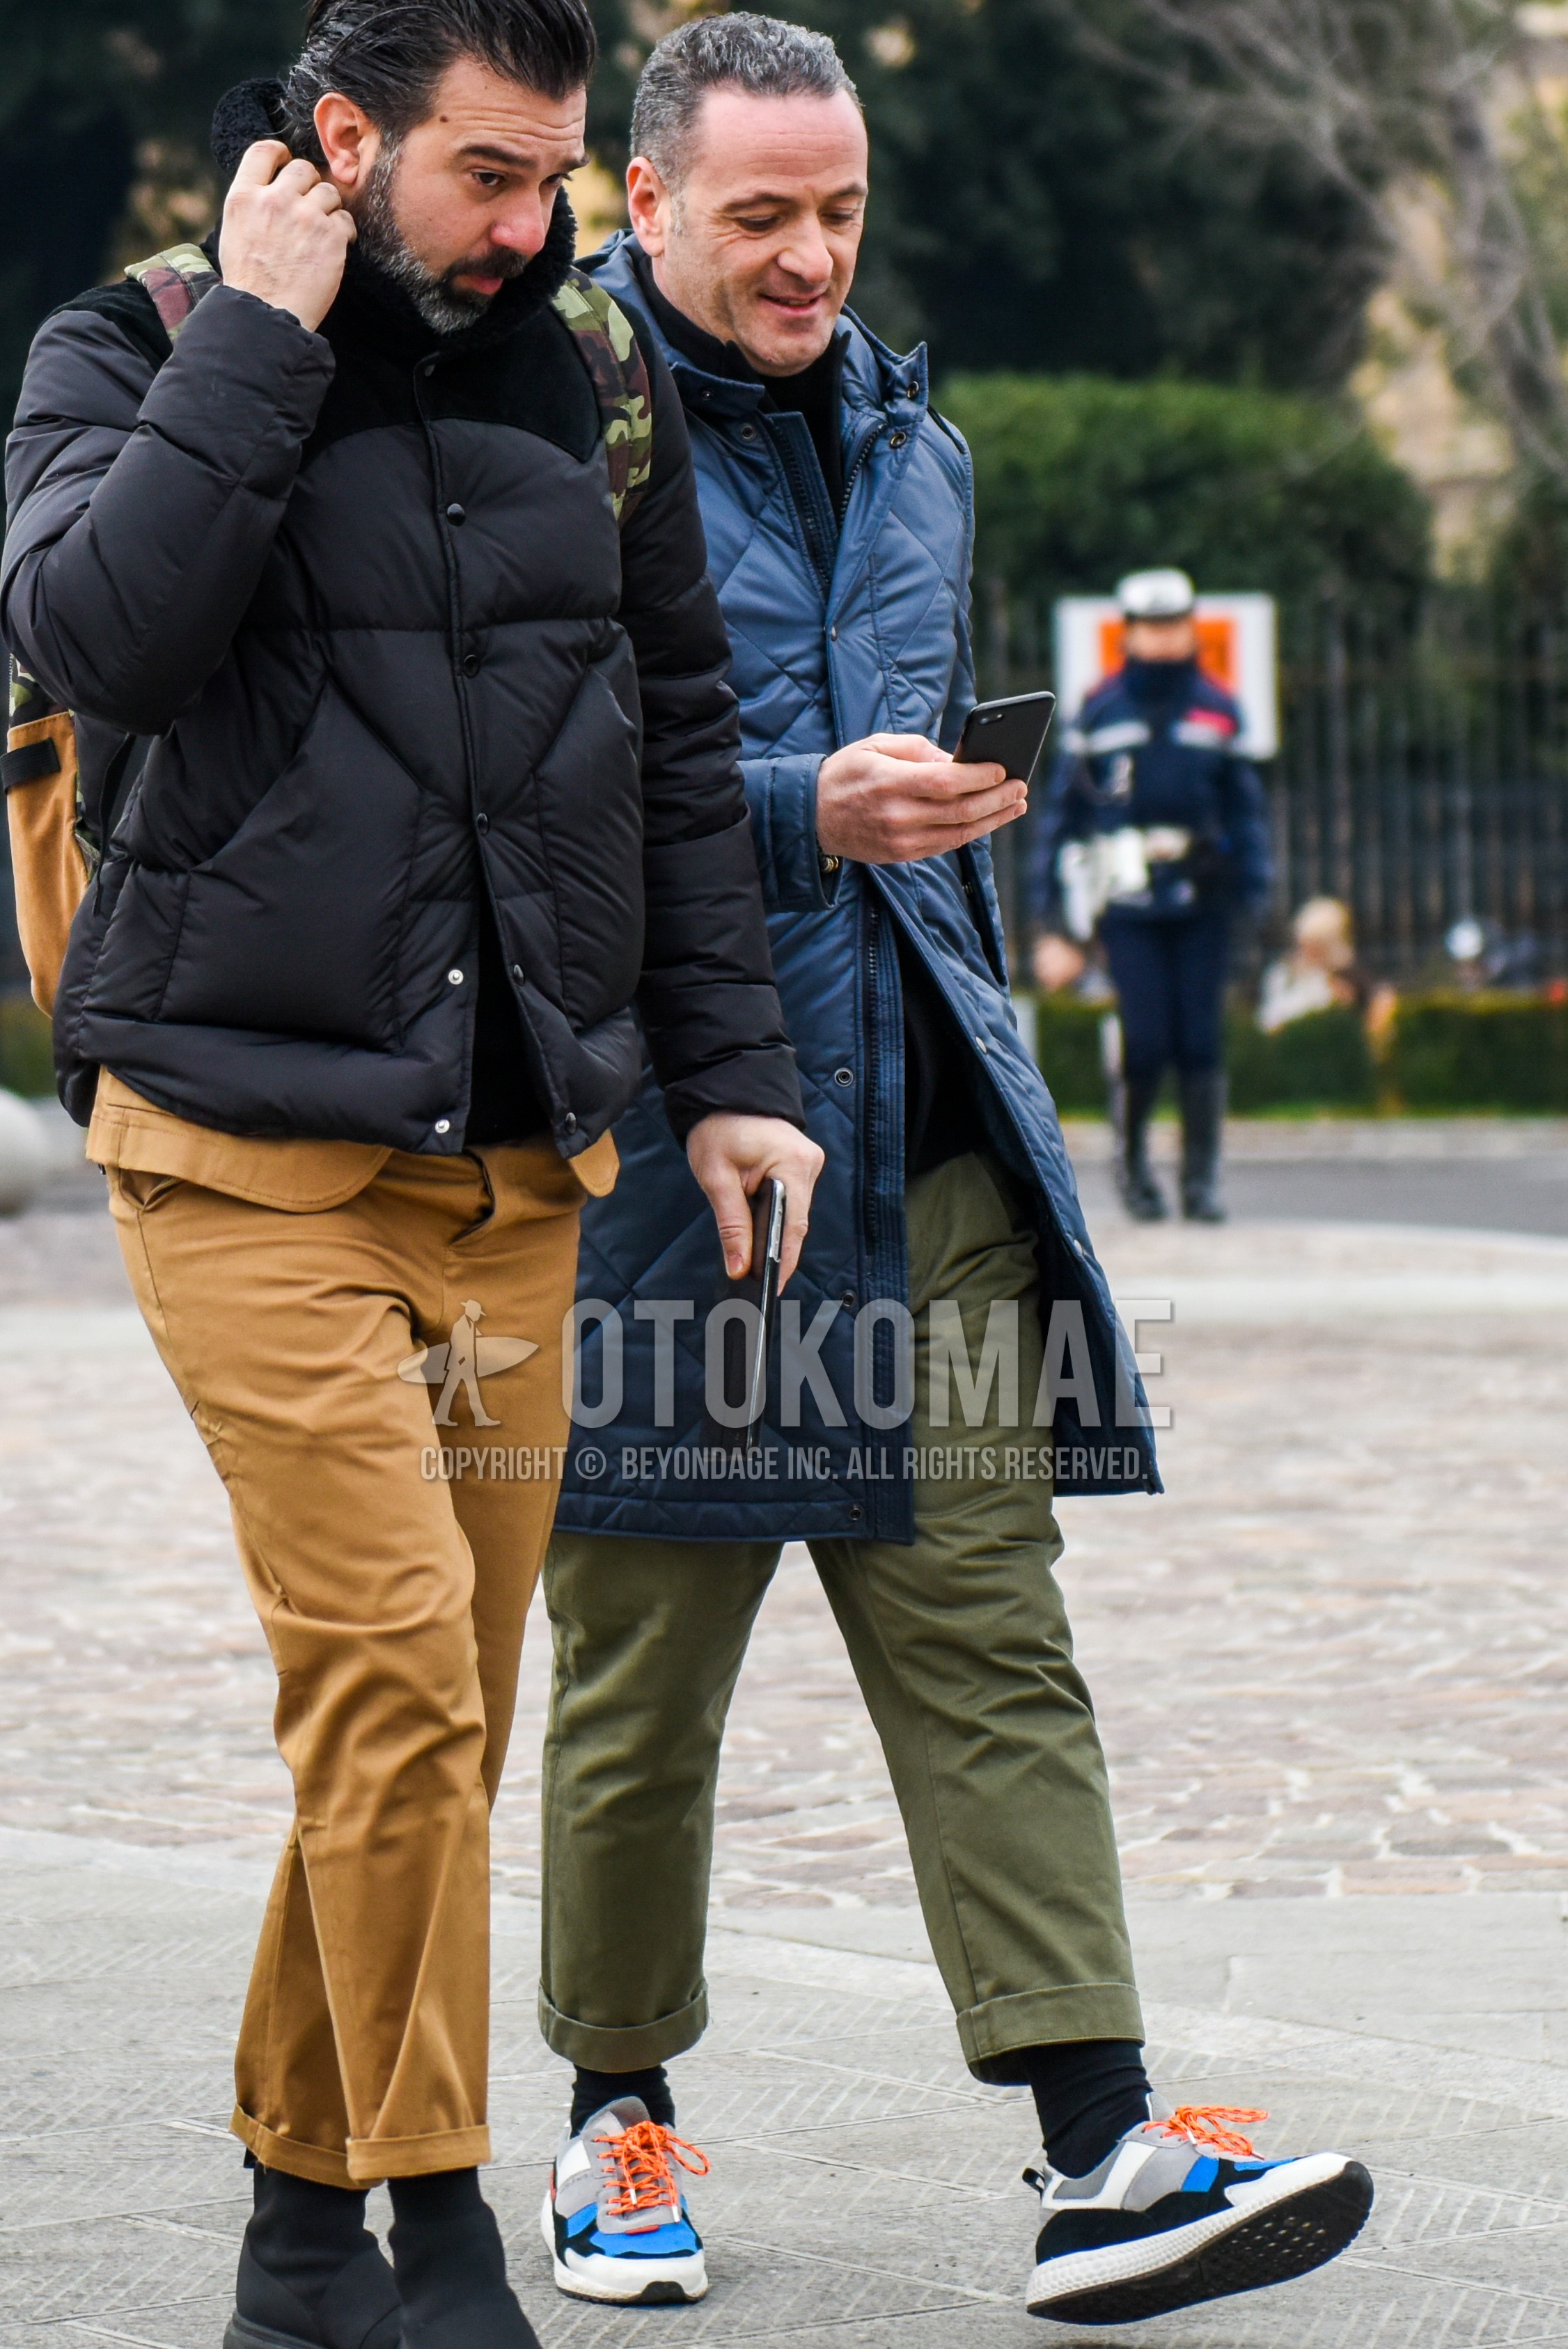 Men's autumn winter outfit with navy plain down jacket, olive green plain chinos, black plain socks, multi-color low-cut sneakers.